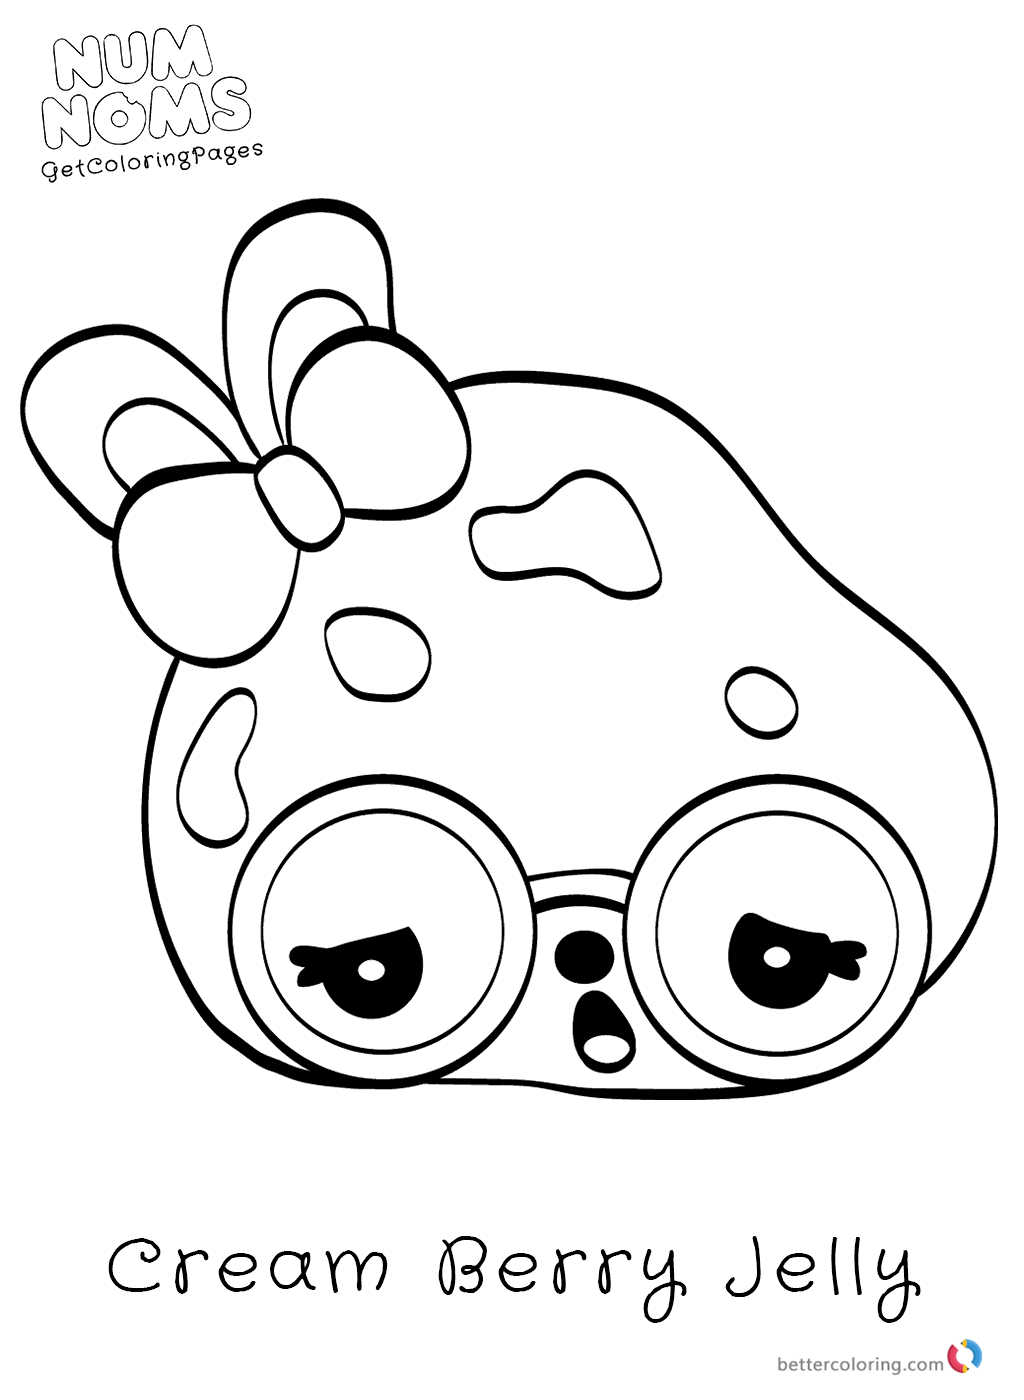 Num Noms Coloring Page for free Free Printable Coloring Pages